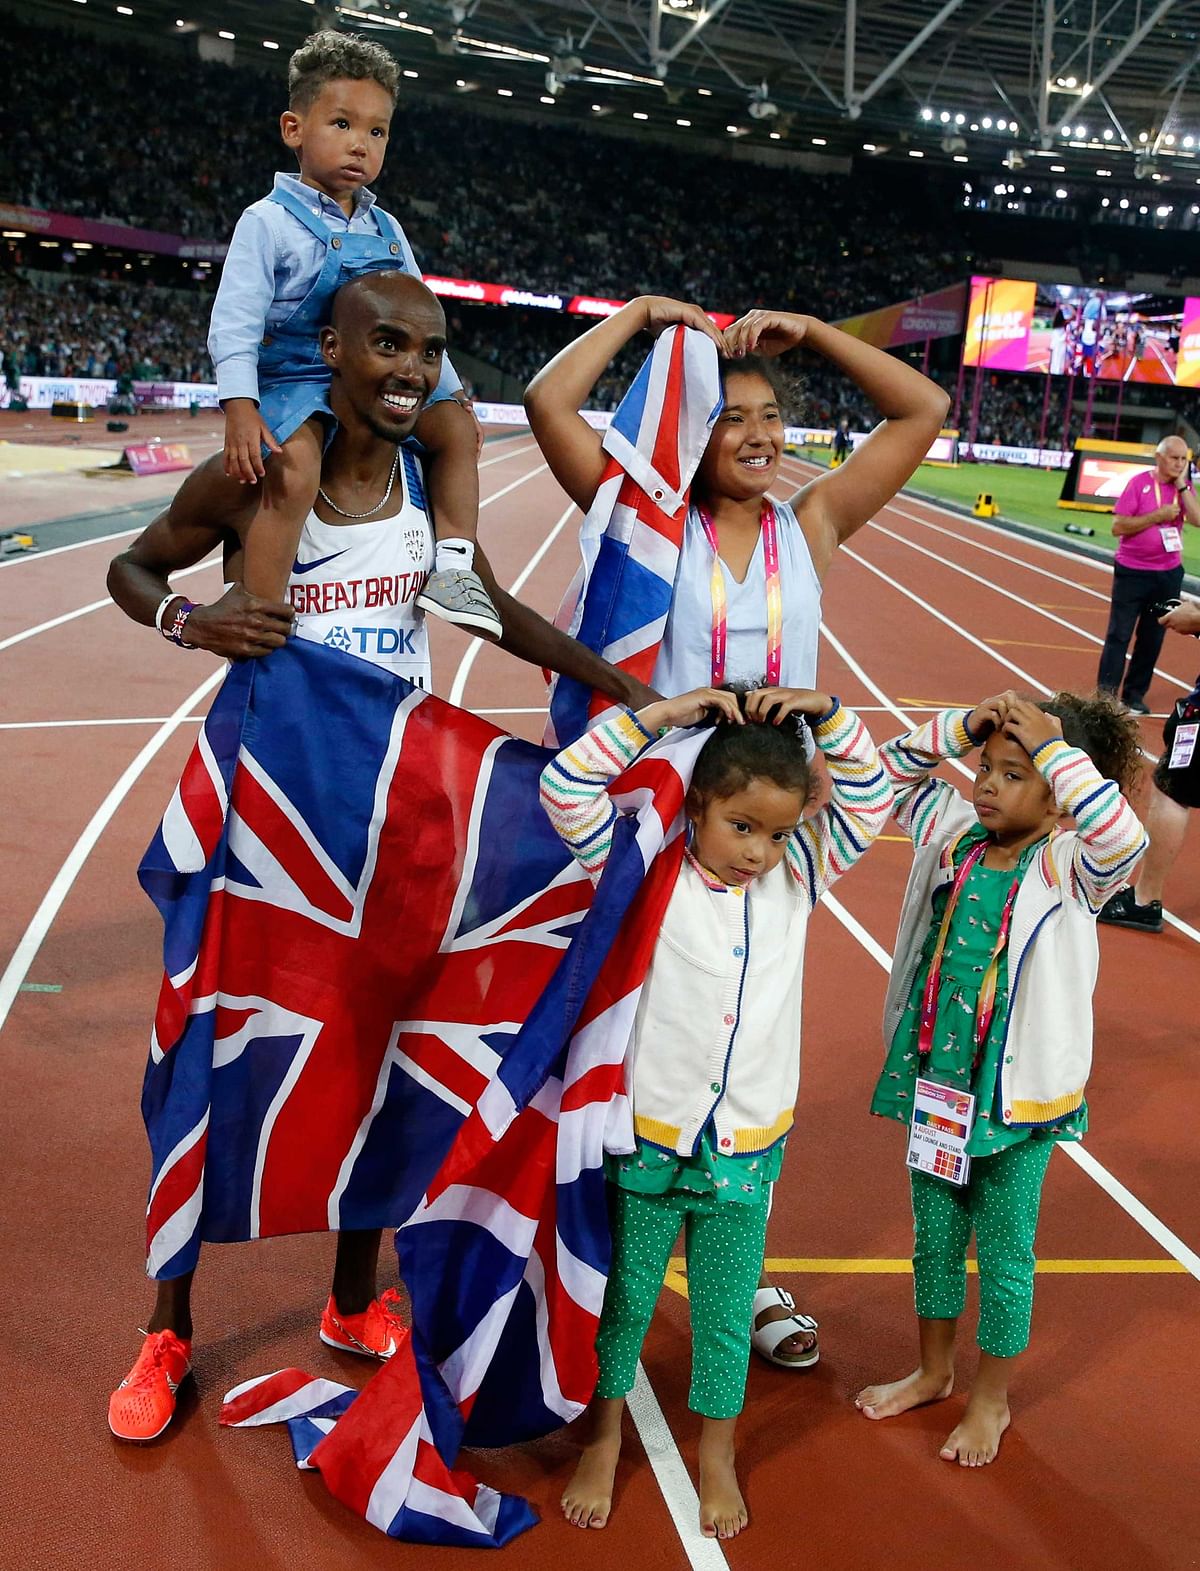 On day 1 of the World Athletics Championships in London.